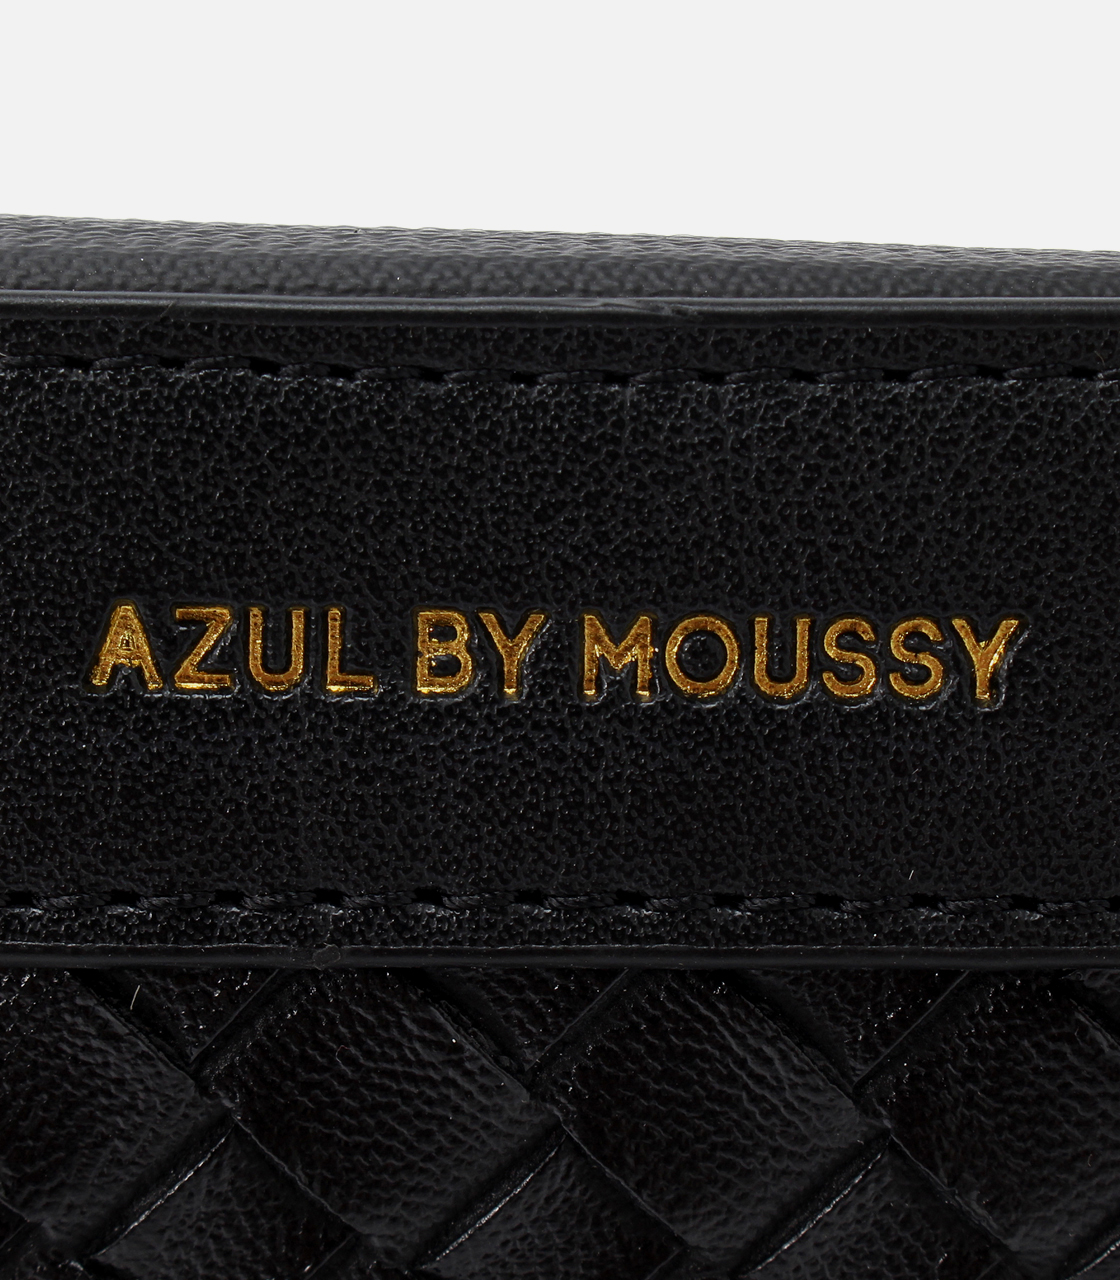 Intorechato Clutch Bag イントレチャートクラッチバッグ Azul By Moussy アズールバイマウジー 公式通販サイト